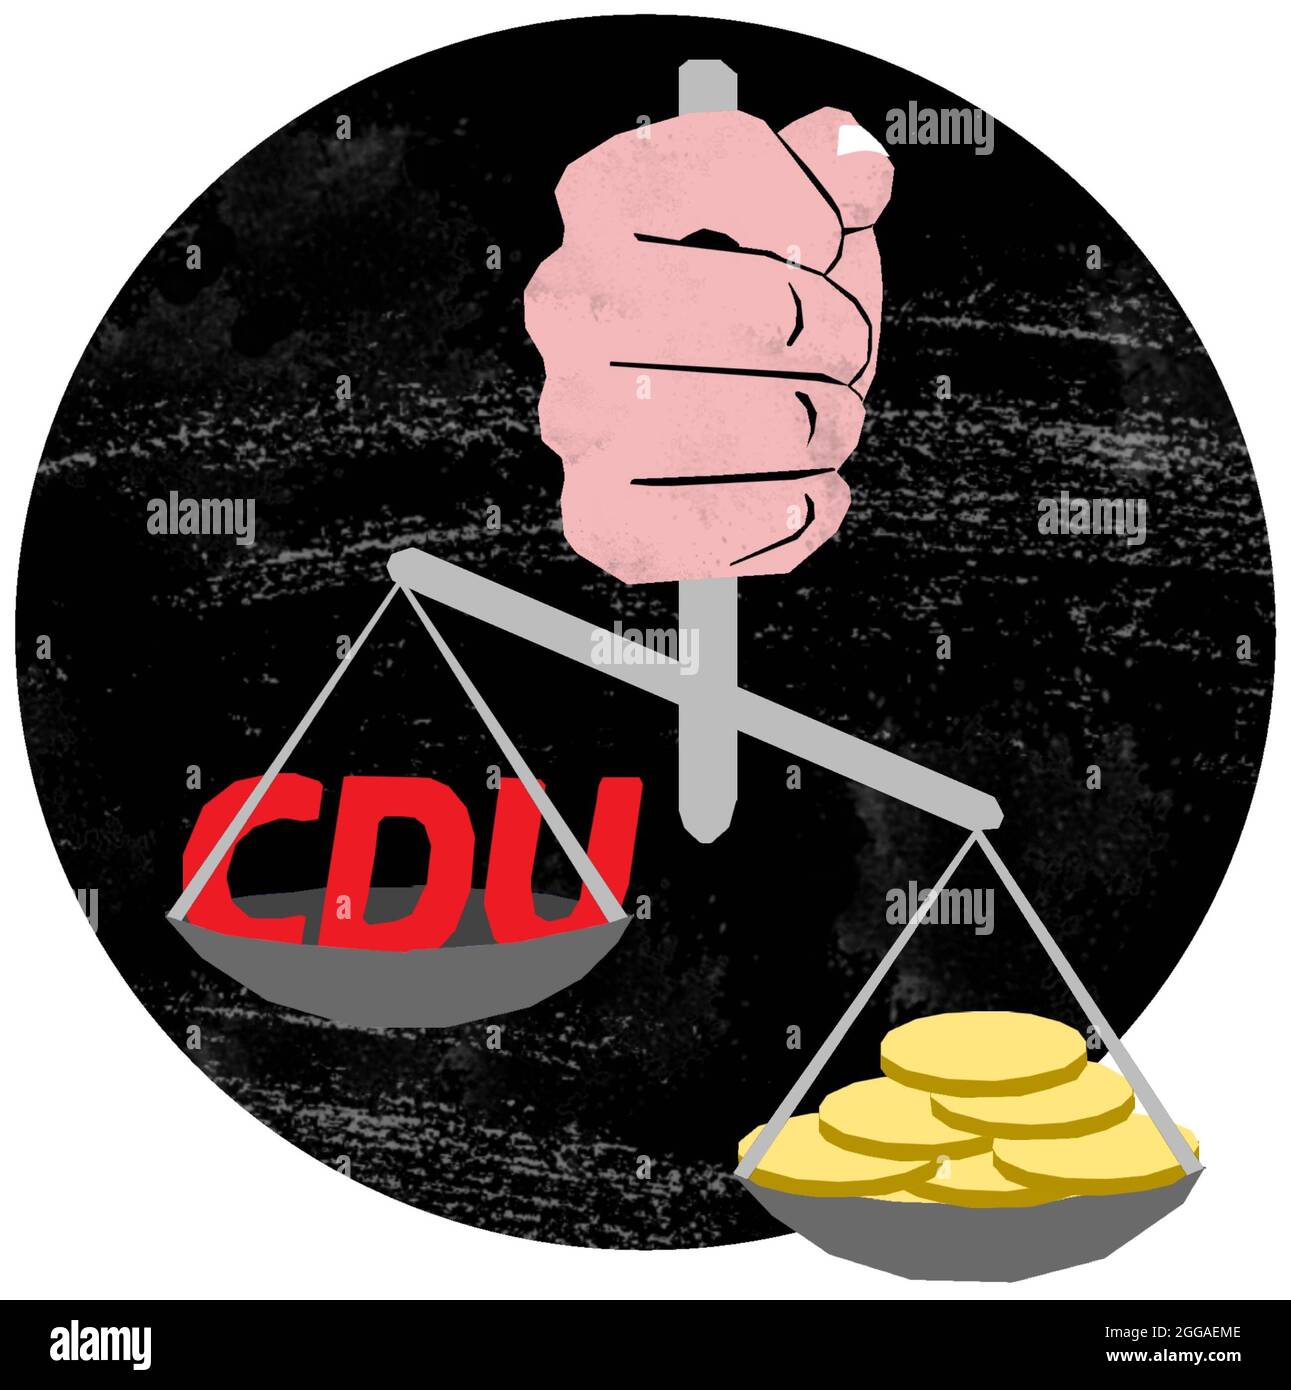 Corruption in the CDU party politicians members, money over values, greed over morality, buyability, selfishness Stock Photo